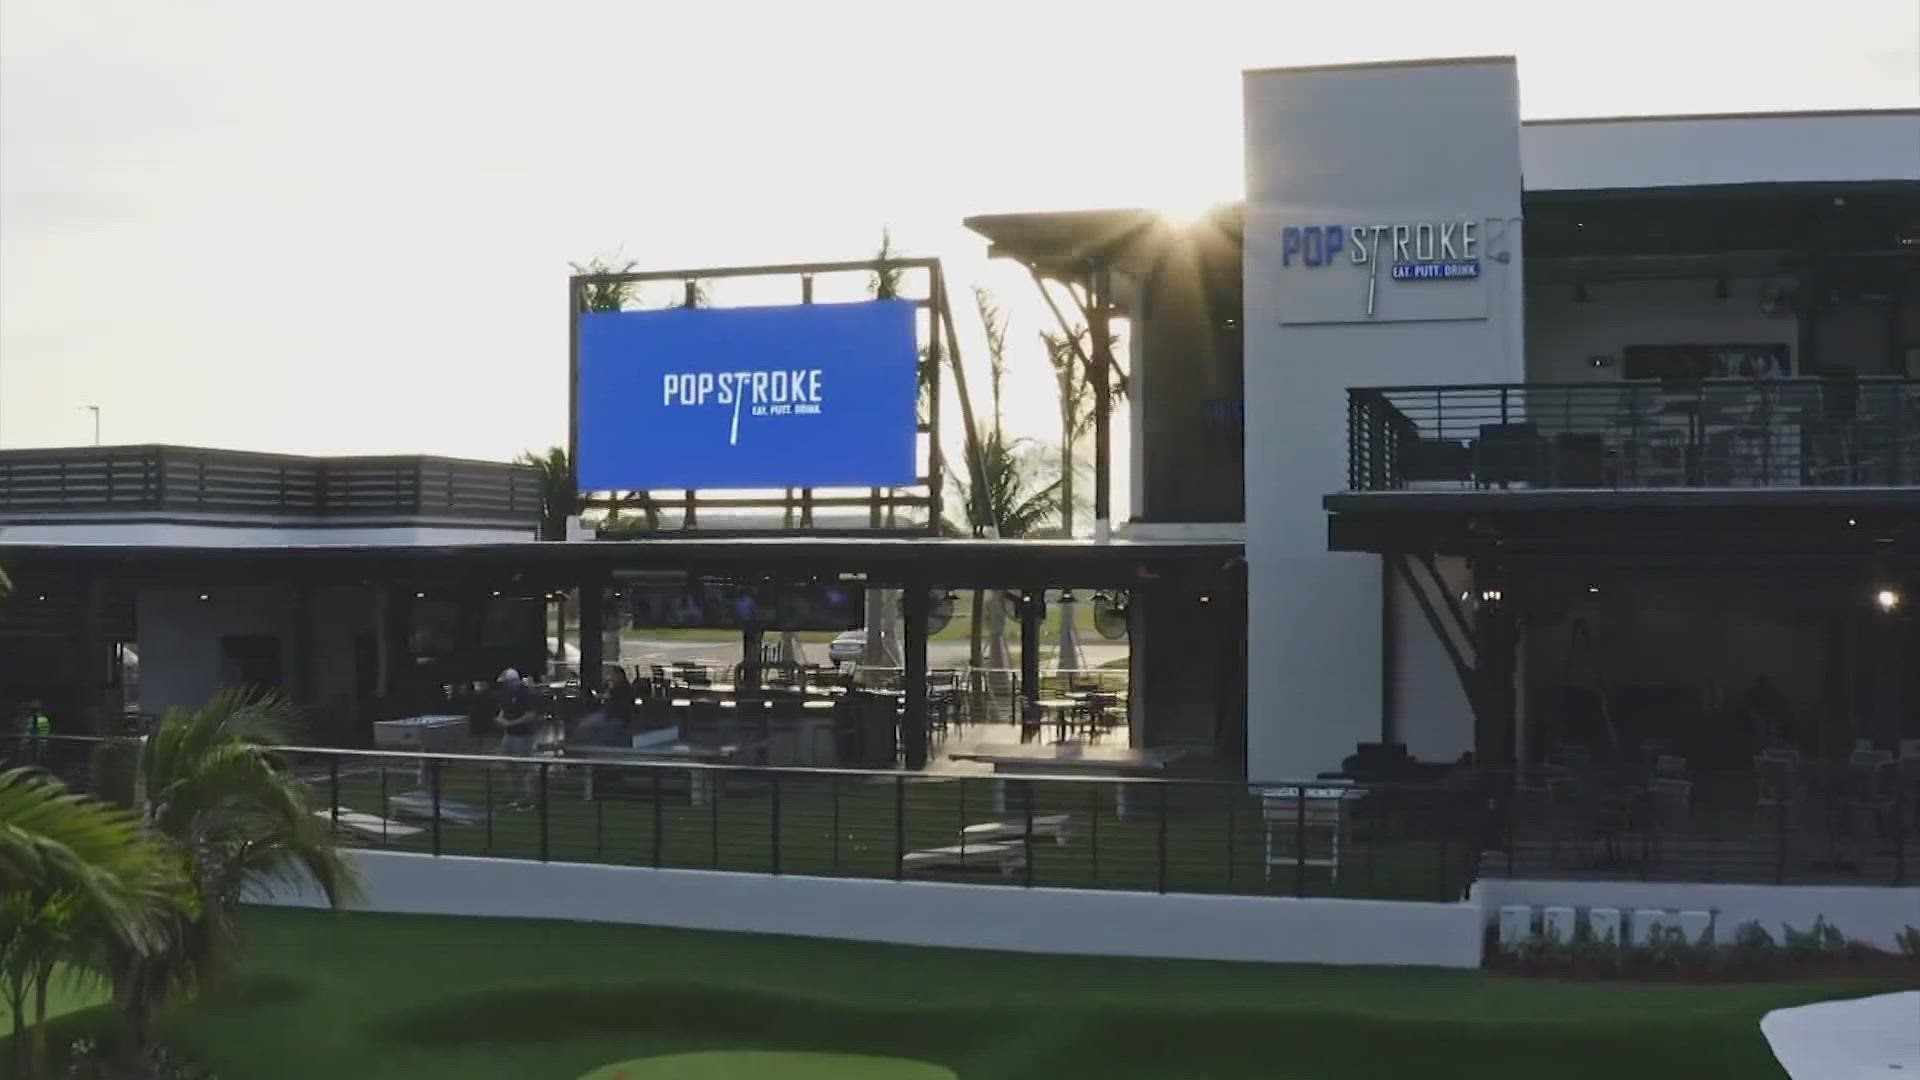 PopStroke consists of two 18-hole putting courses, a restaurant, a rooftop bar and more.